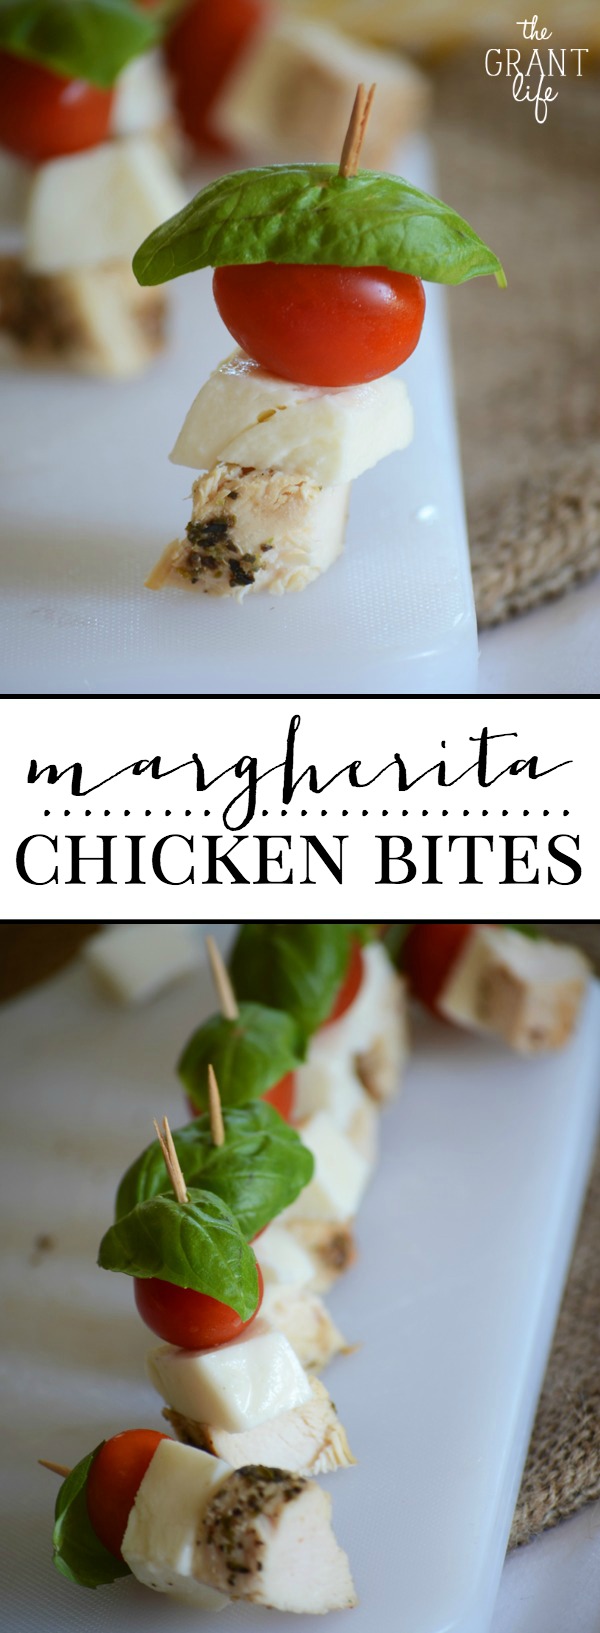 Margherita Chicken Bites - perfect appetizer for any get together or party!